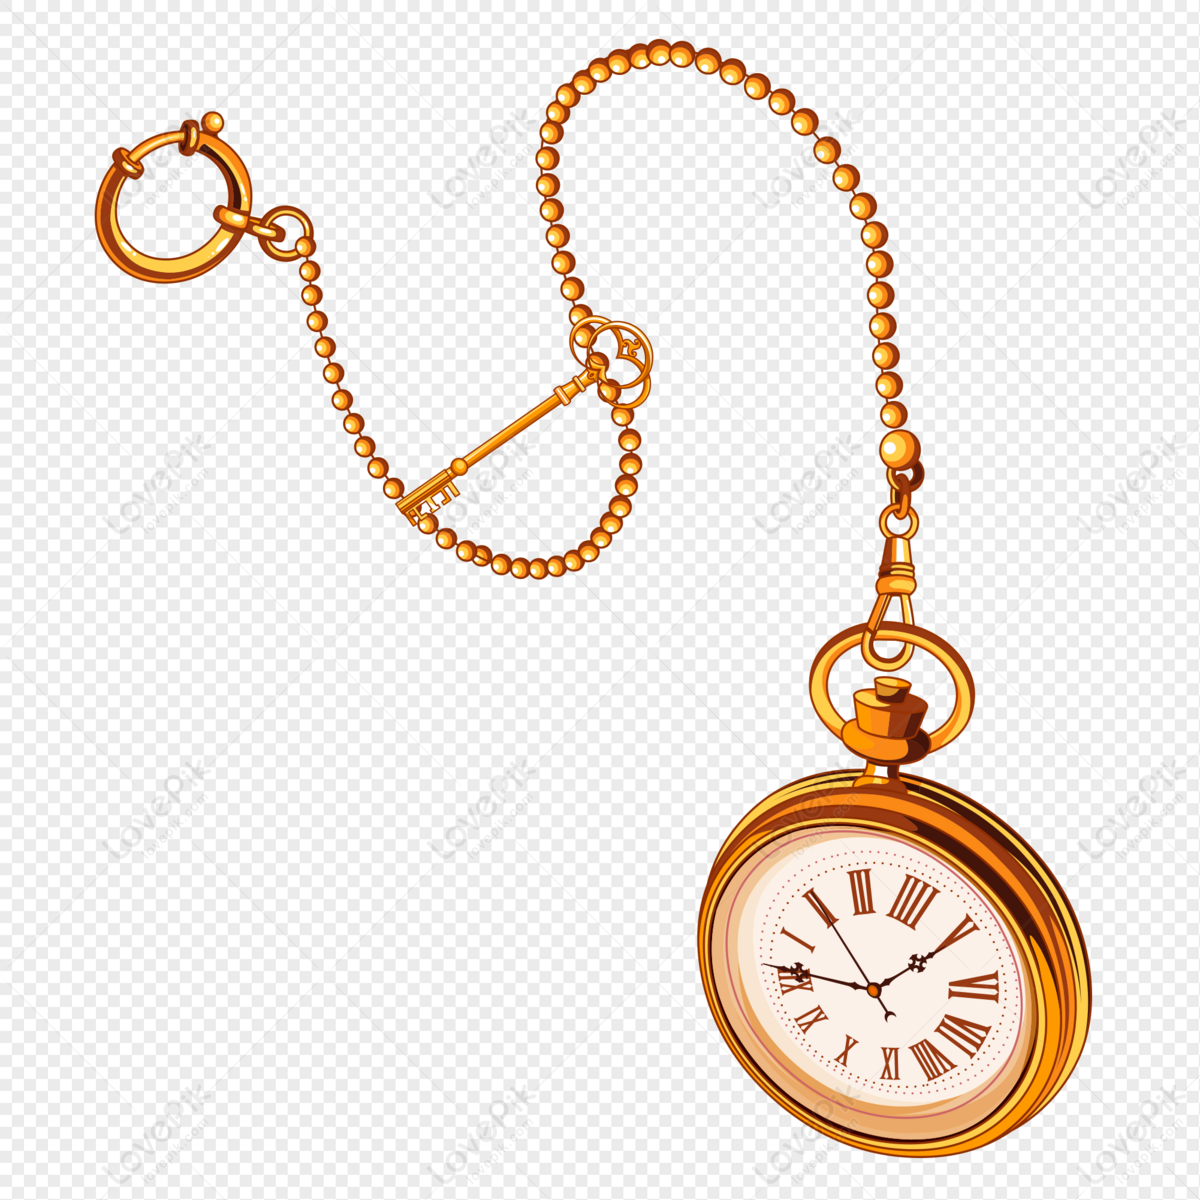 Pocket Watch PNG Transparent And Clipart Image For Free Download - Lovepik  | 401565876